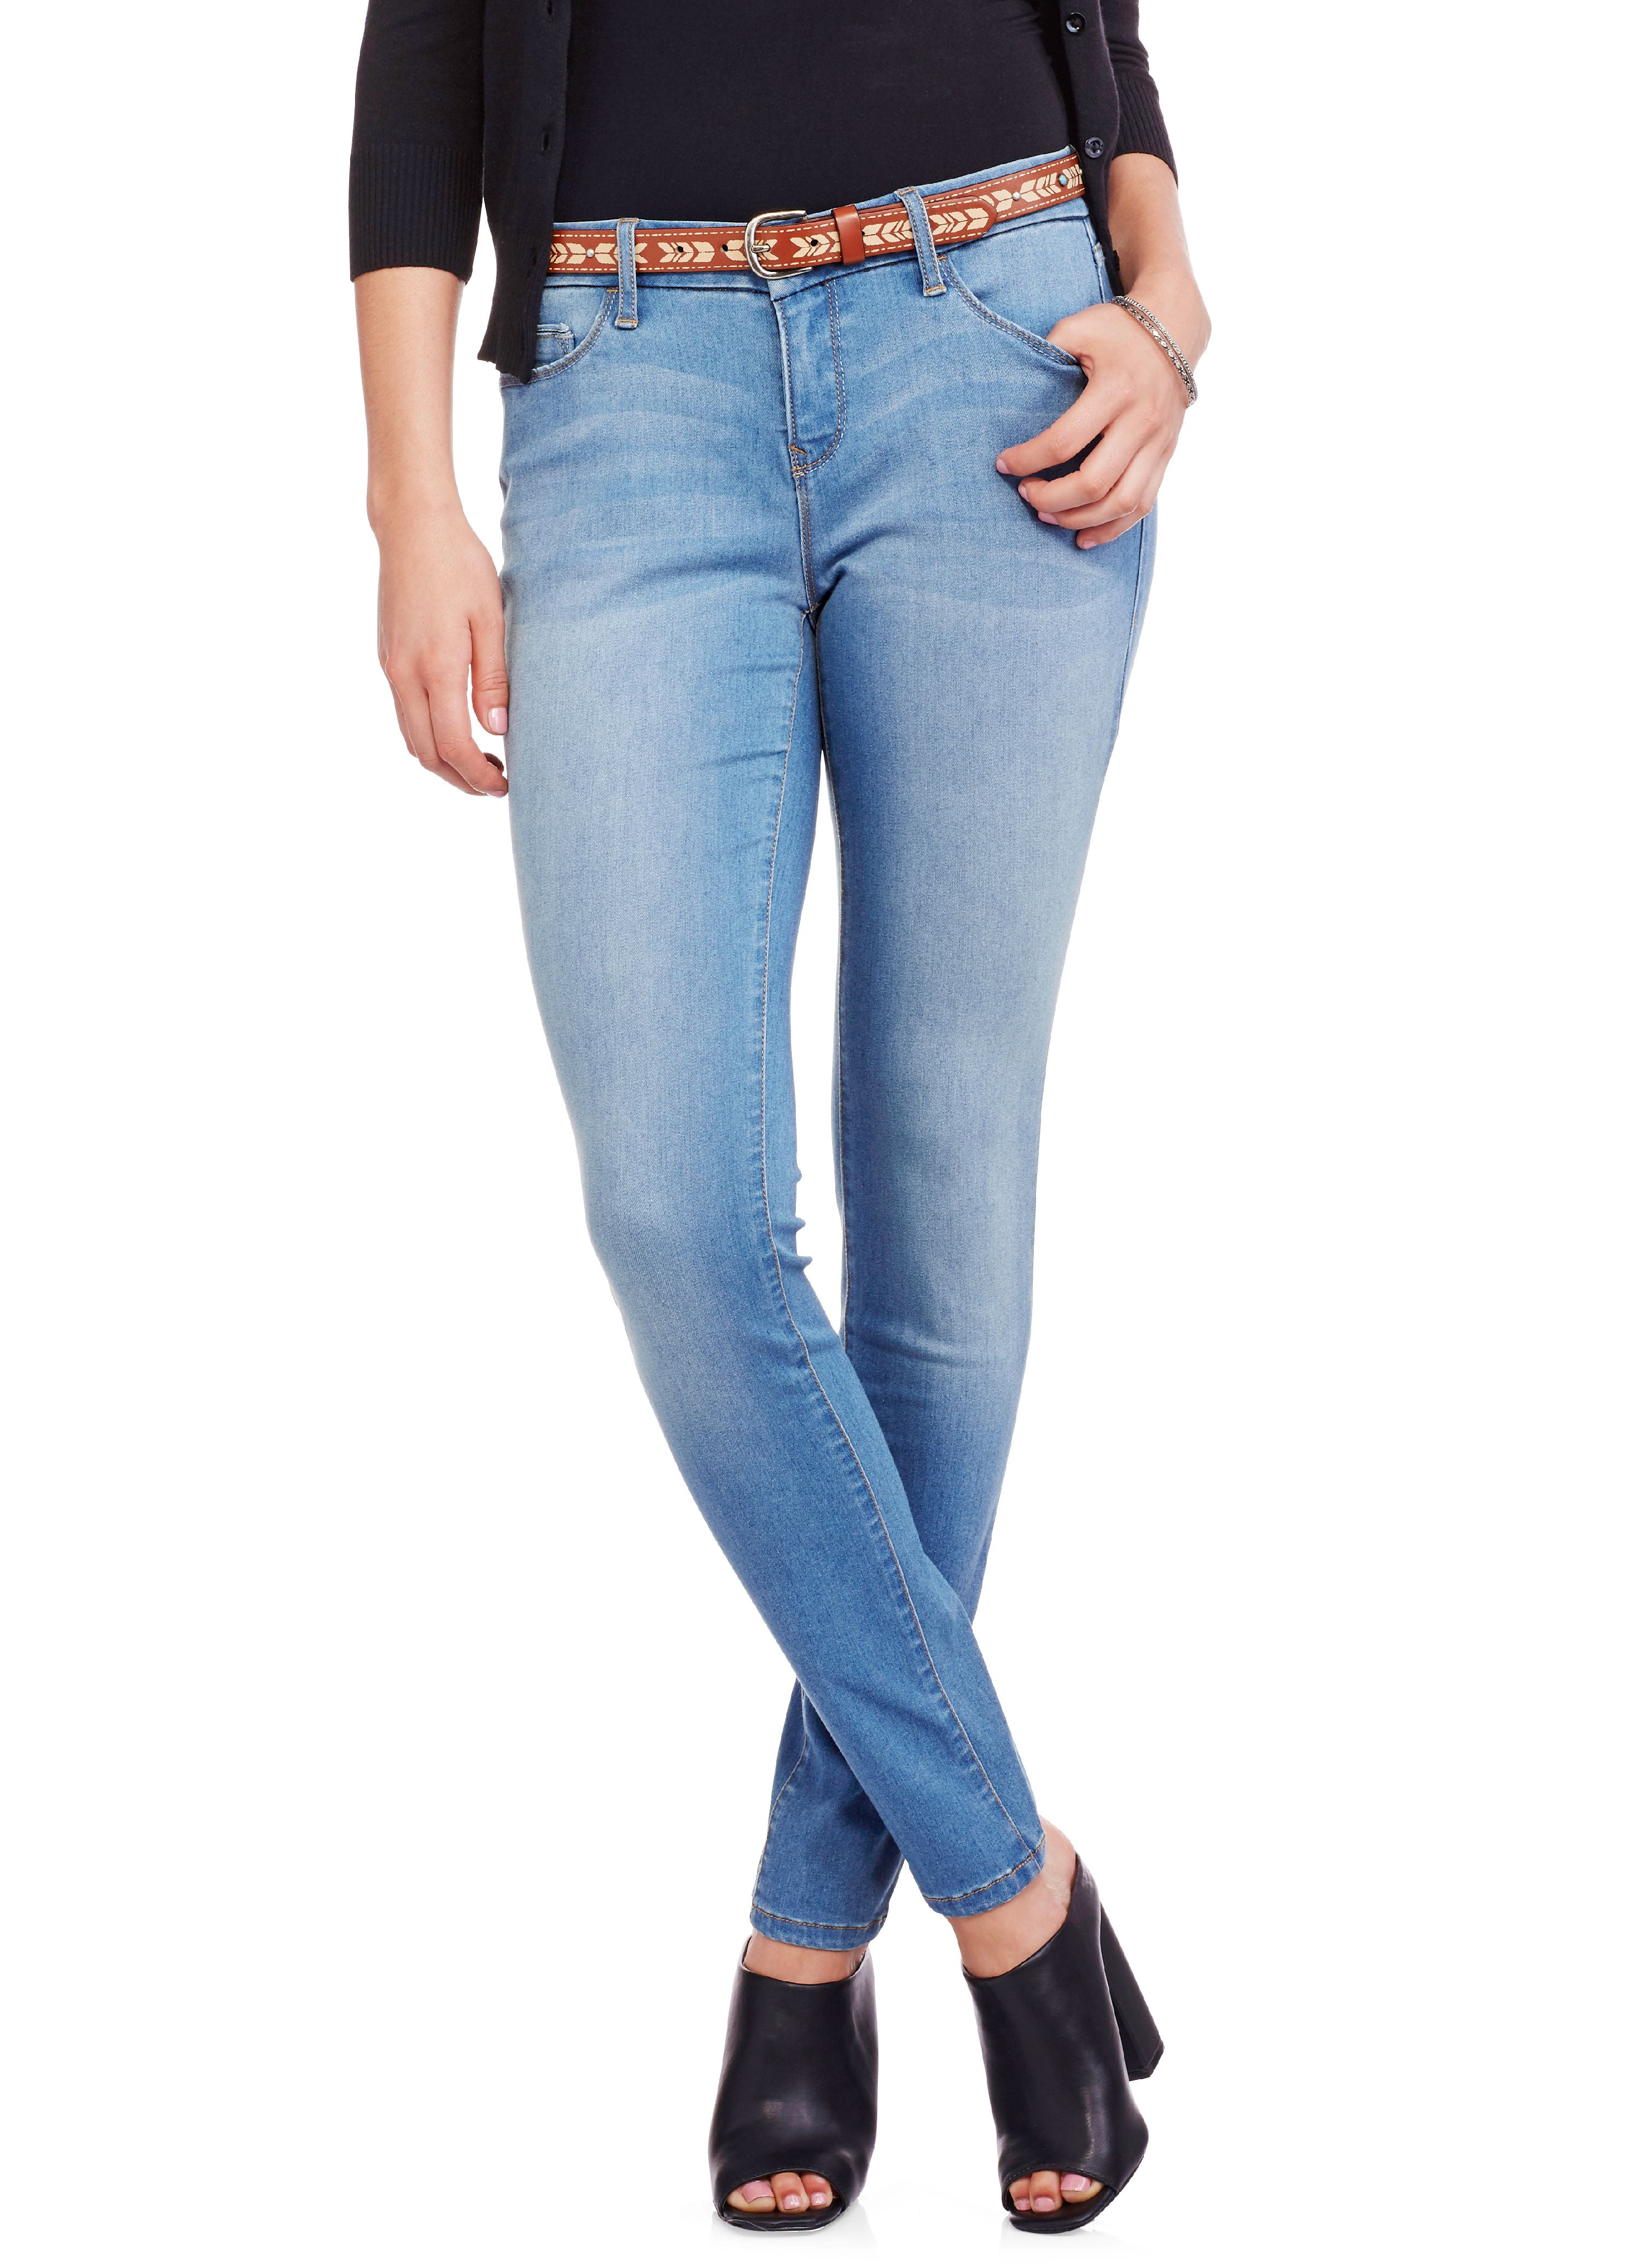 Faded Glory Women's Mid Rise Skinny Jeans